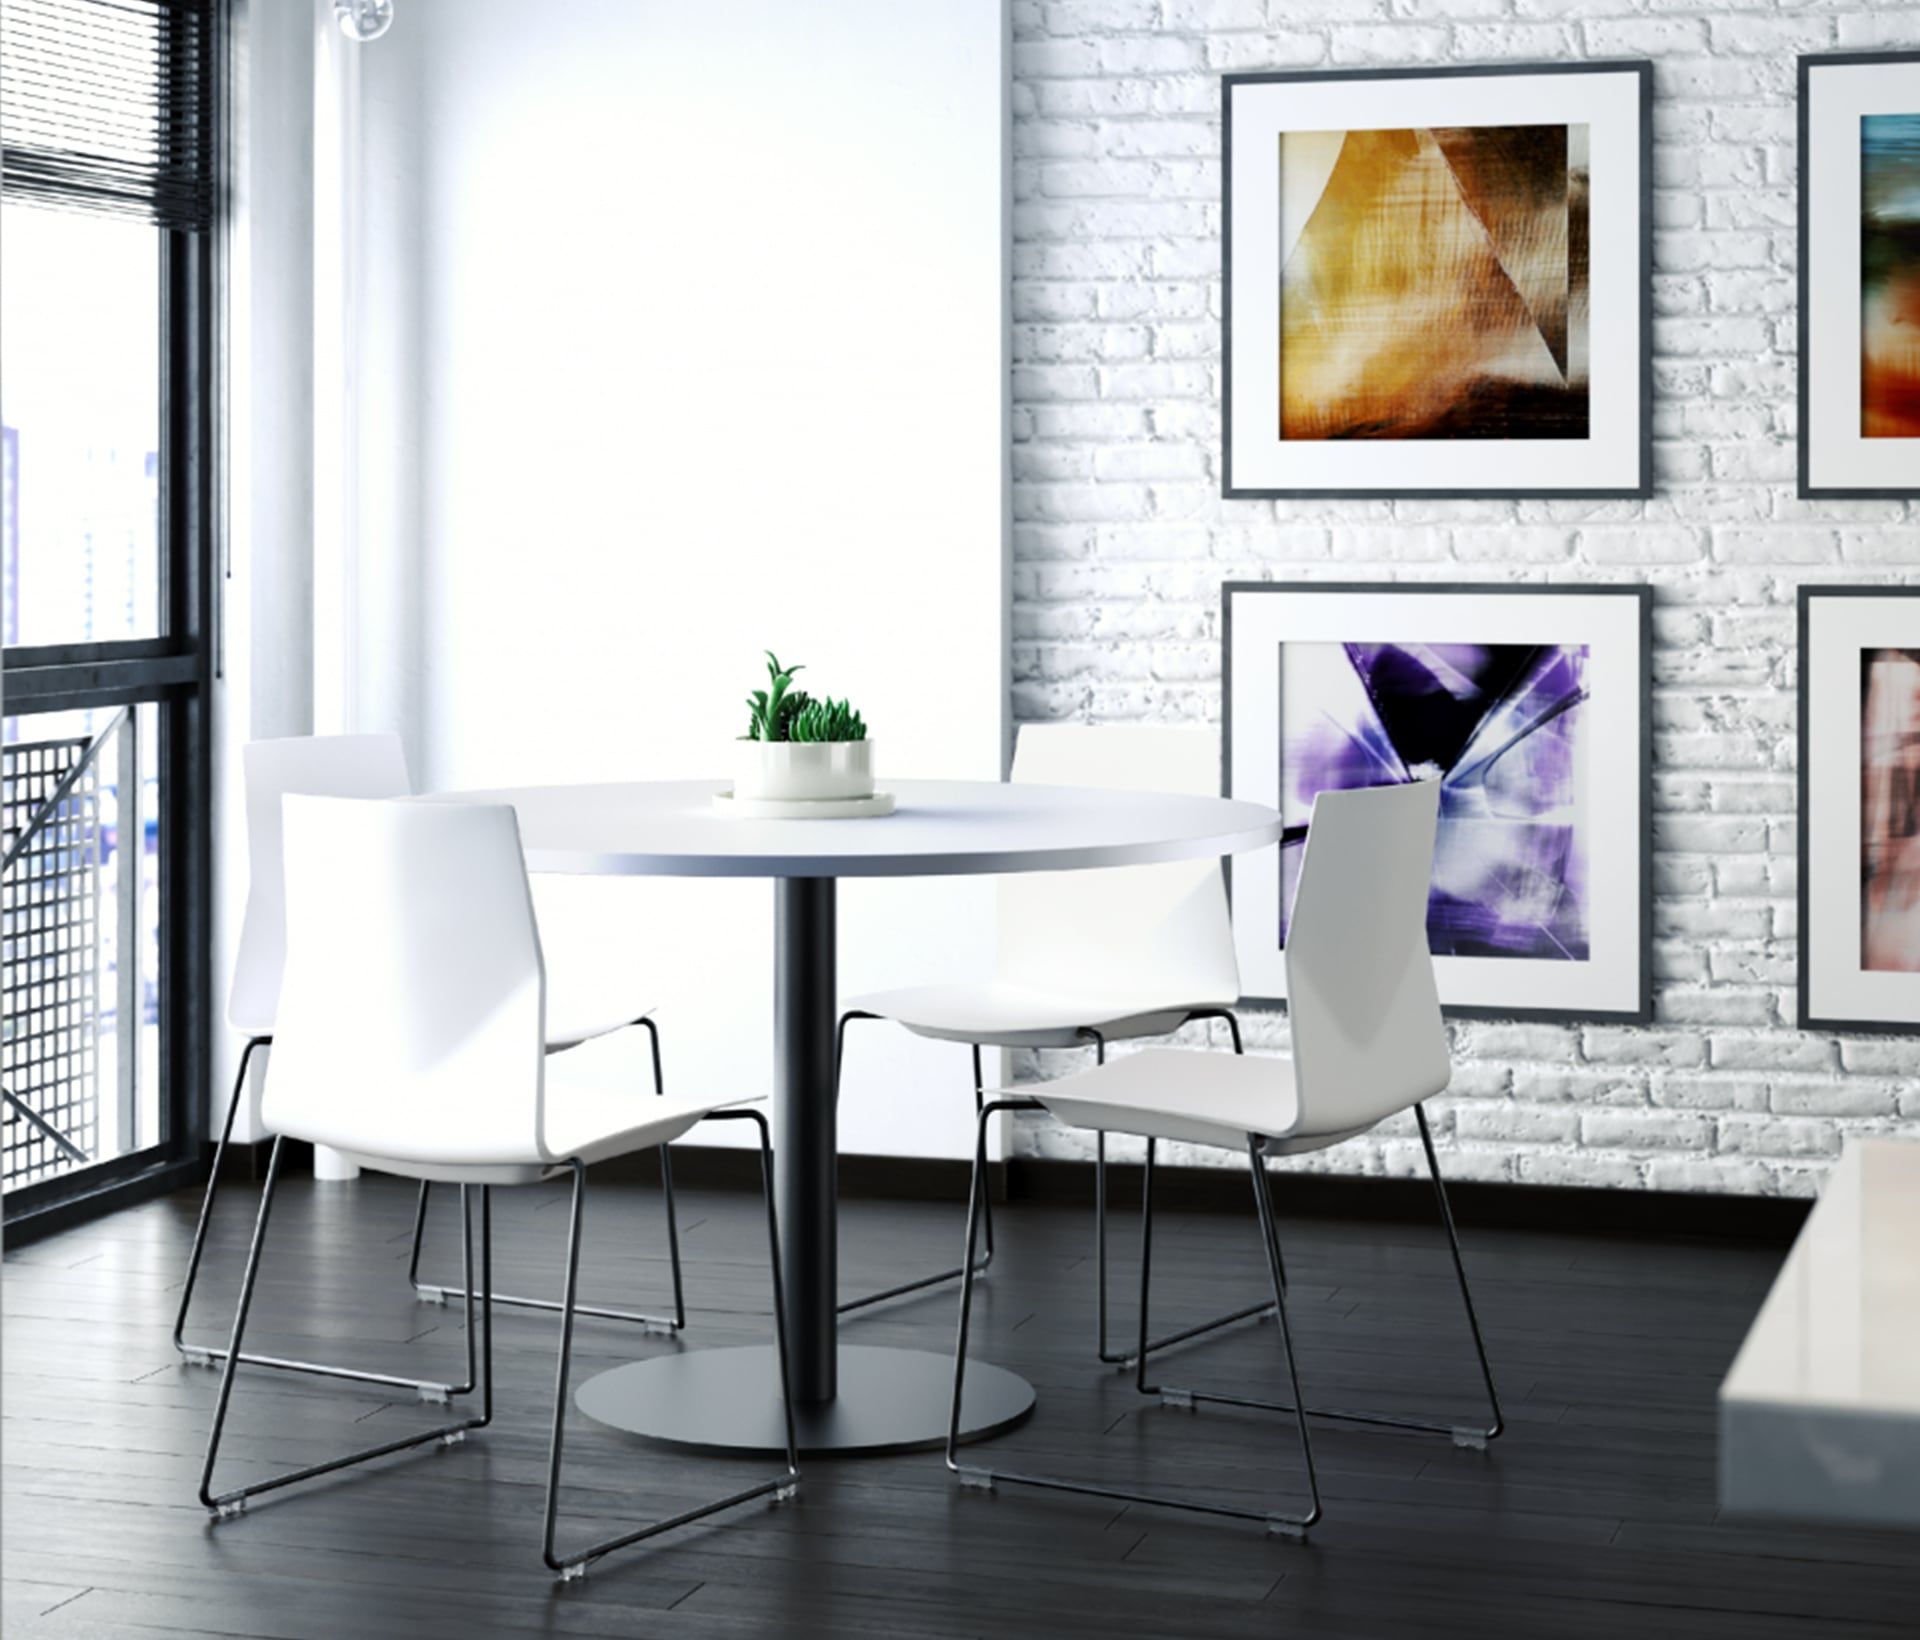 A white table and chairs in a room with framed pictures.